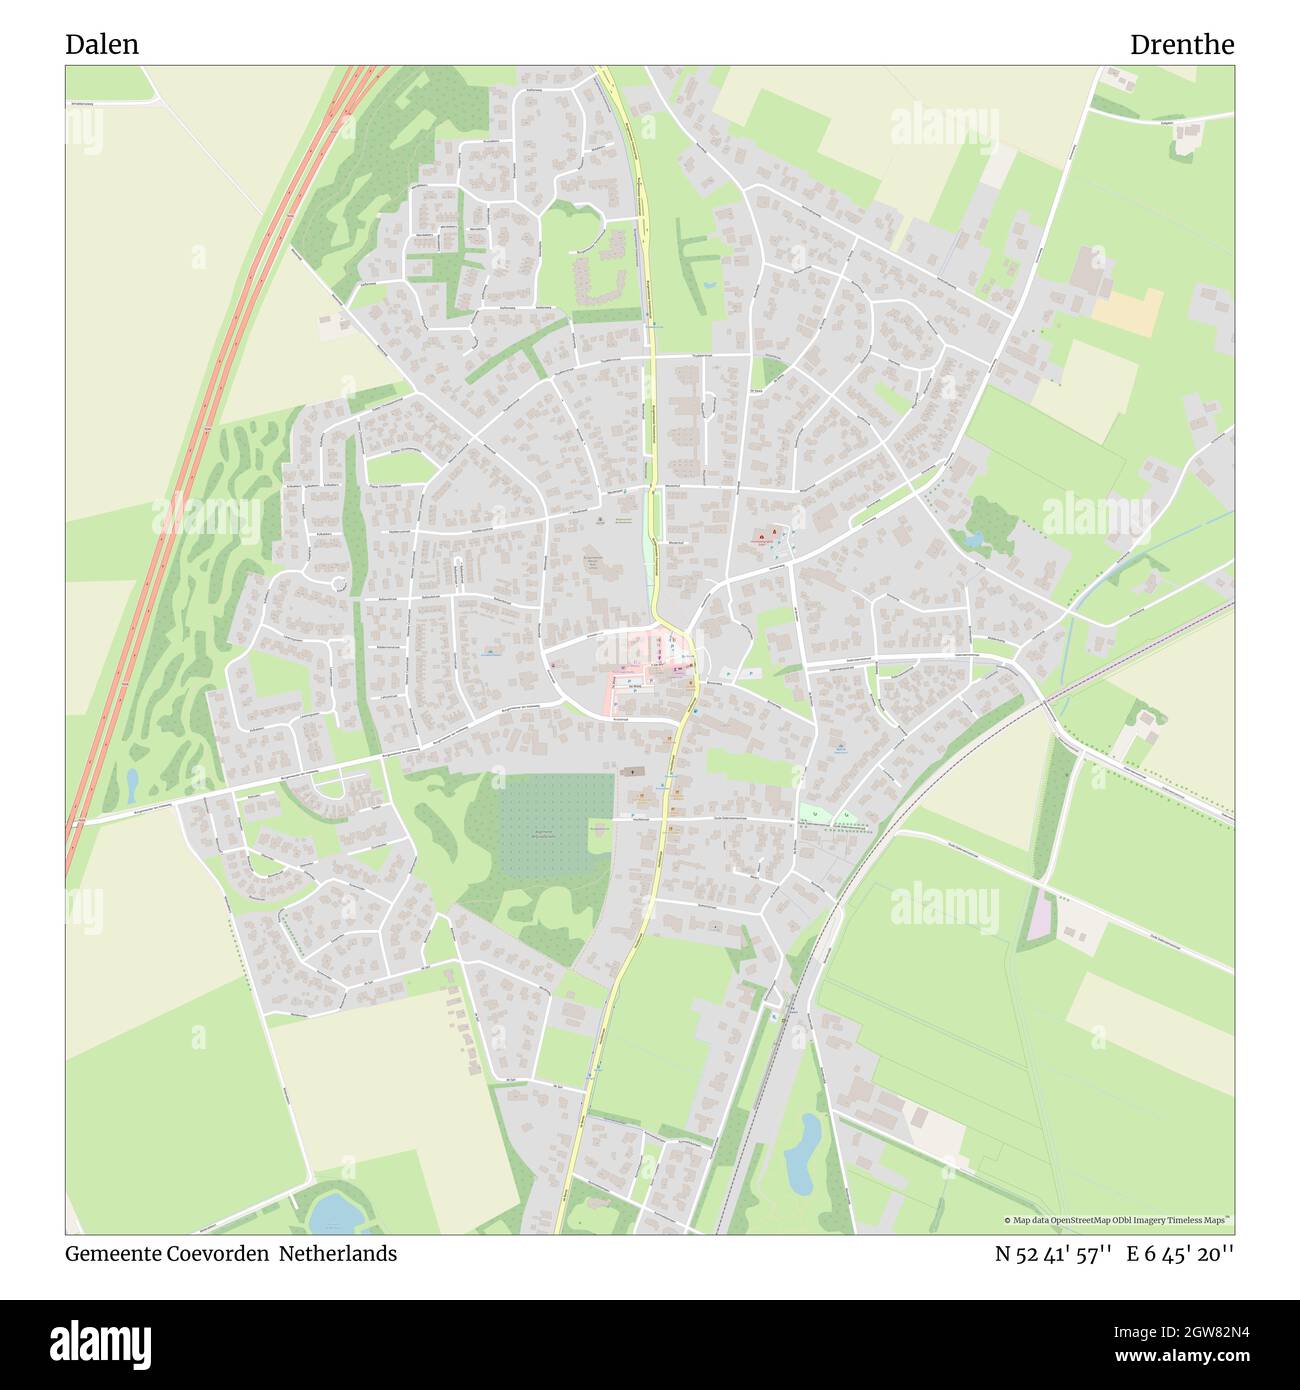 Dalen, Gemeente Coevorden, Netherlands, Drenthe, N 52 41' 57'', E 6 45' 20'', map, Timeless Map published in 2021. Travelers, explorers and adventurers like Florence Nightingale, David Livingstone, Ernest Shackleton, Lewis and Clark and Sherlock Holmes relied on maps to plan travels to the world's most remote corners, Timeless Maps is mapping most locations on the globe, showing the achievement of great dreams Stock Photo